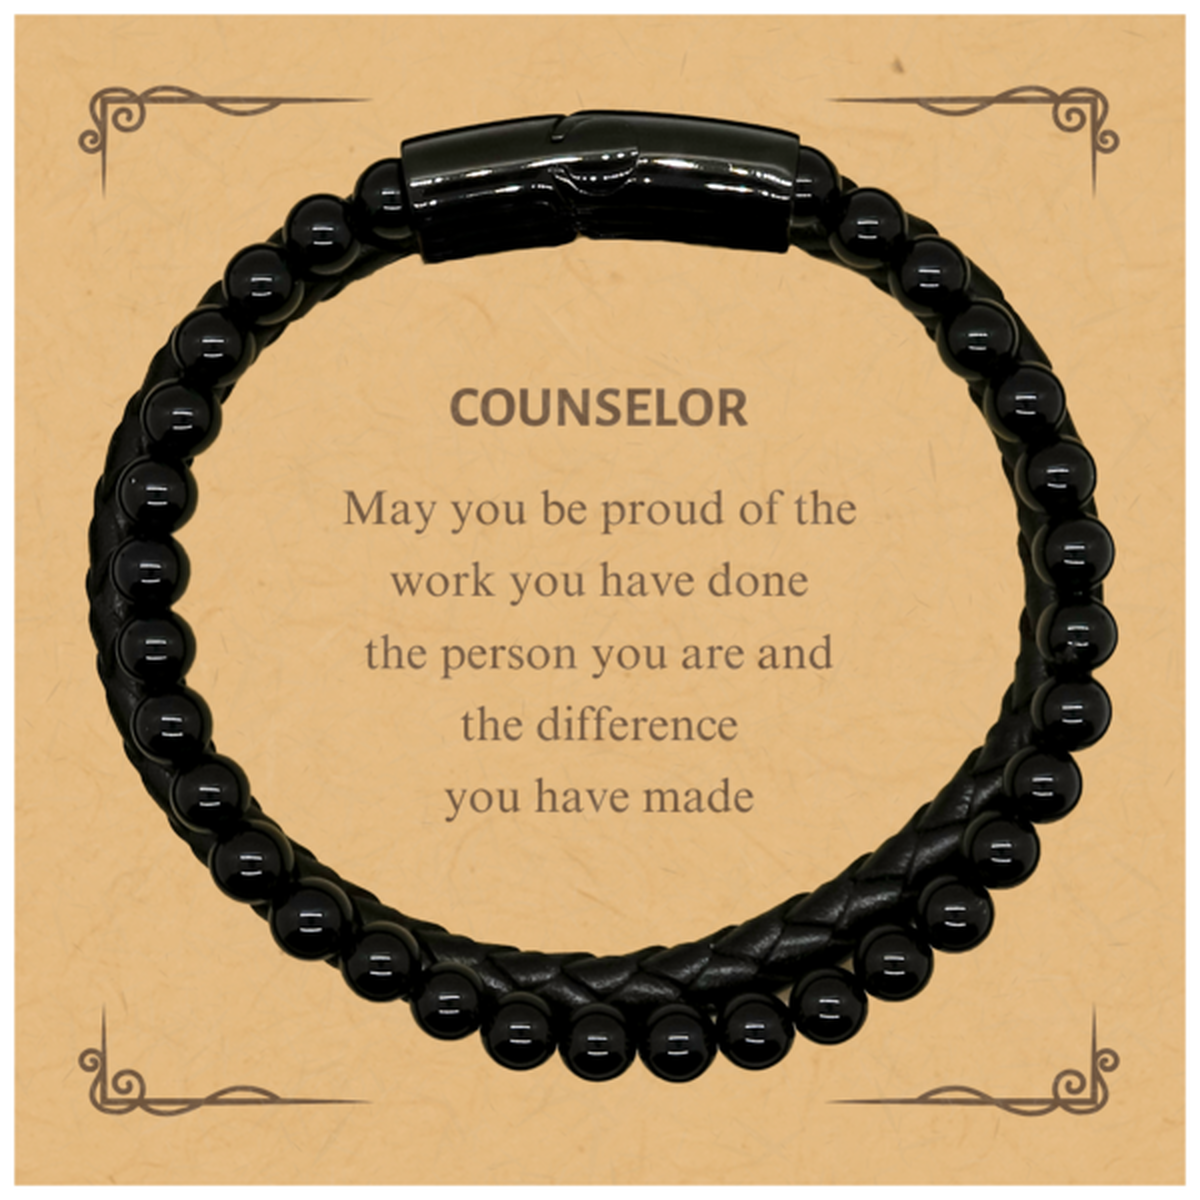 Counselor May you be proud of the work you have done, Retirement Counselor Stone Leather Bracelets for Colleague Appreciation Gifts Amazing for Counselor